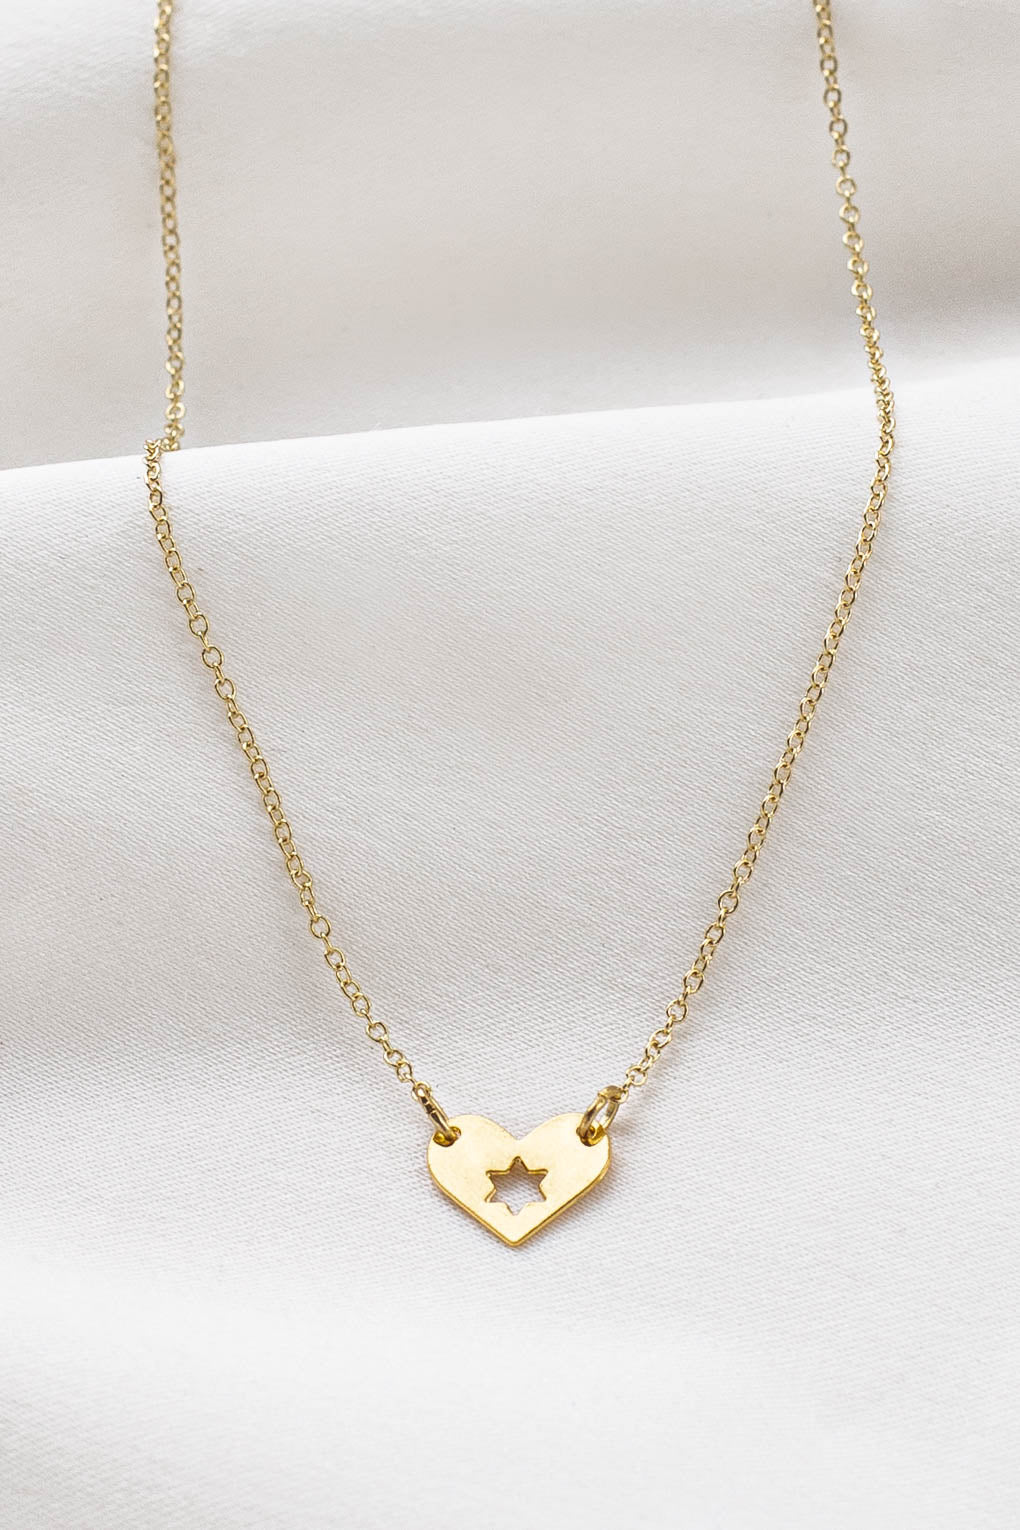 ISRAEL AT HEART NECKLACE GOLD PLATED